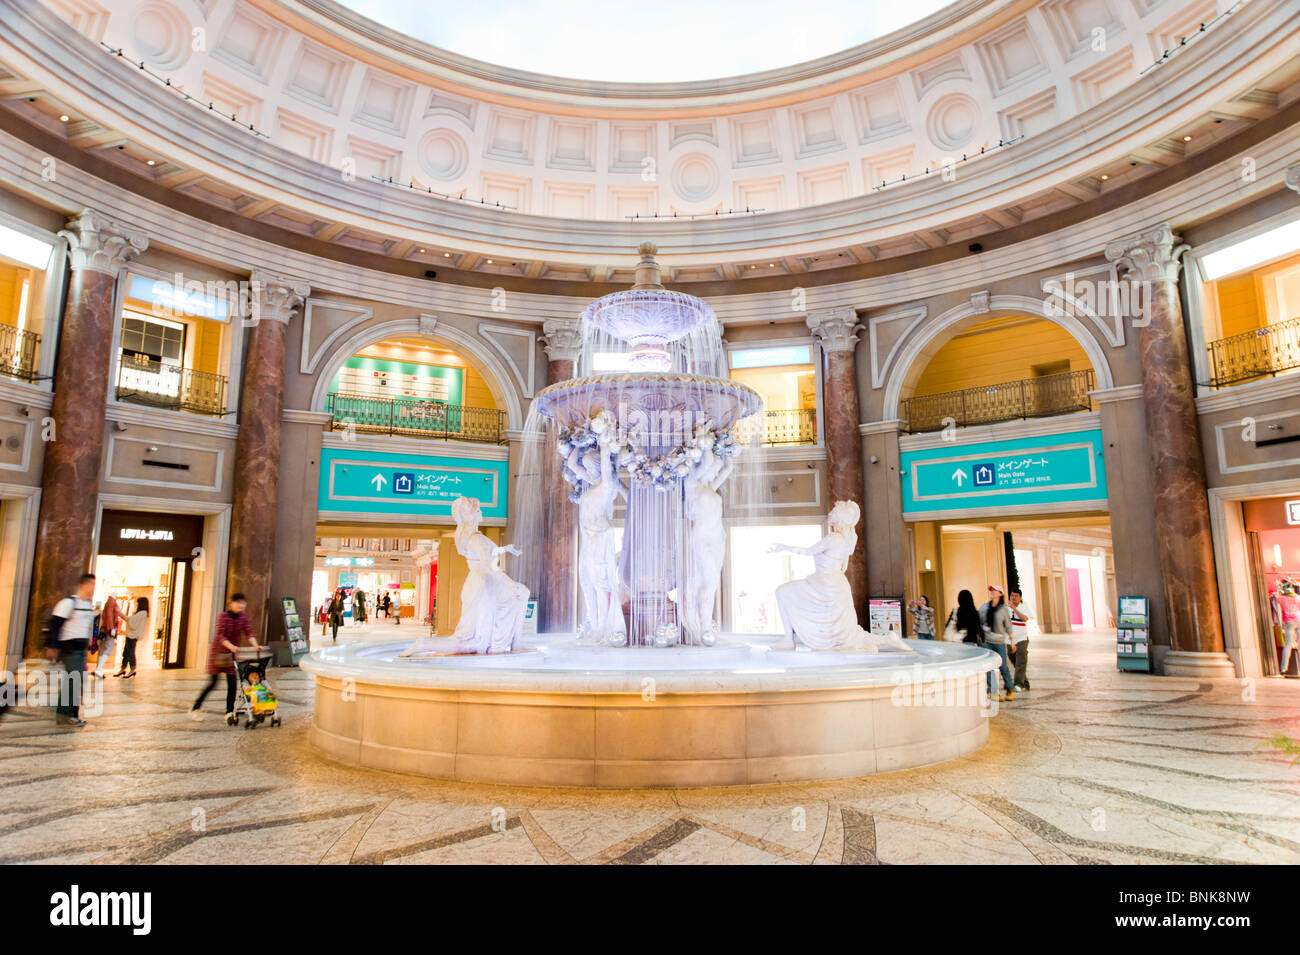 Venus Fort indoor-street shopping mall in Palette Town on Odaiba Island, Tokyo, Japan Stock Photo